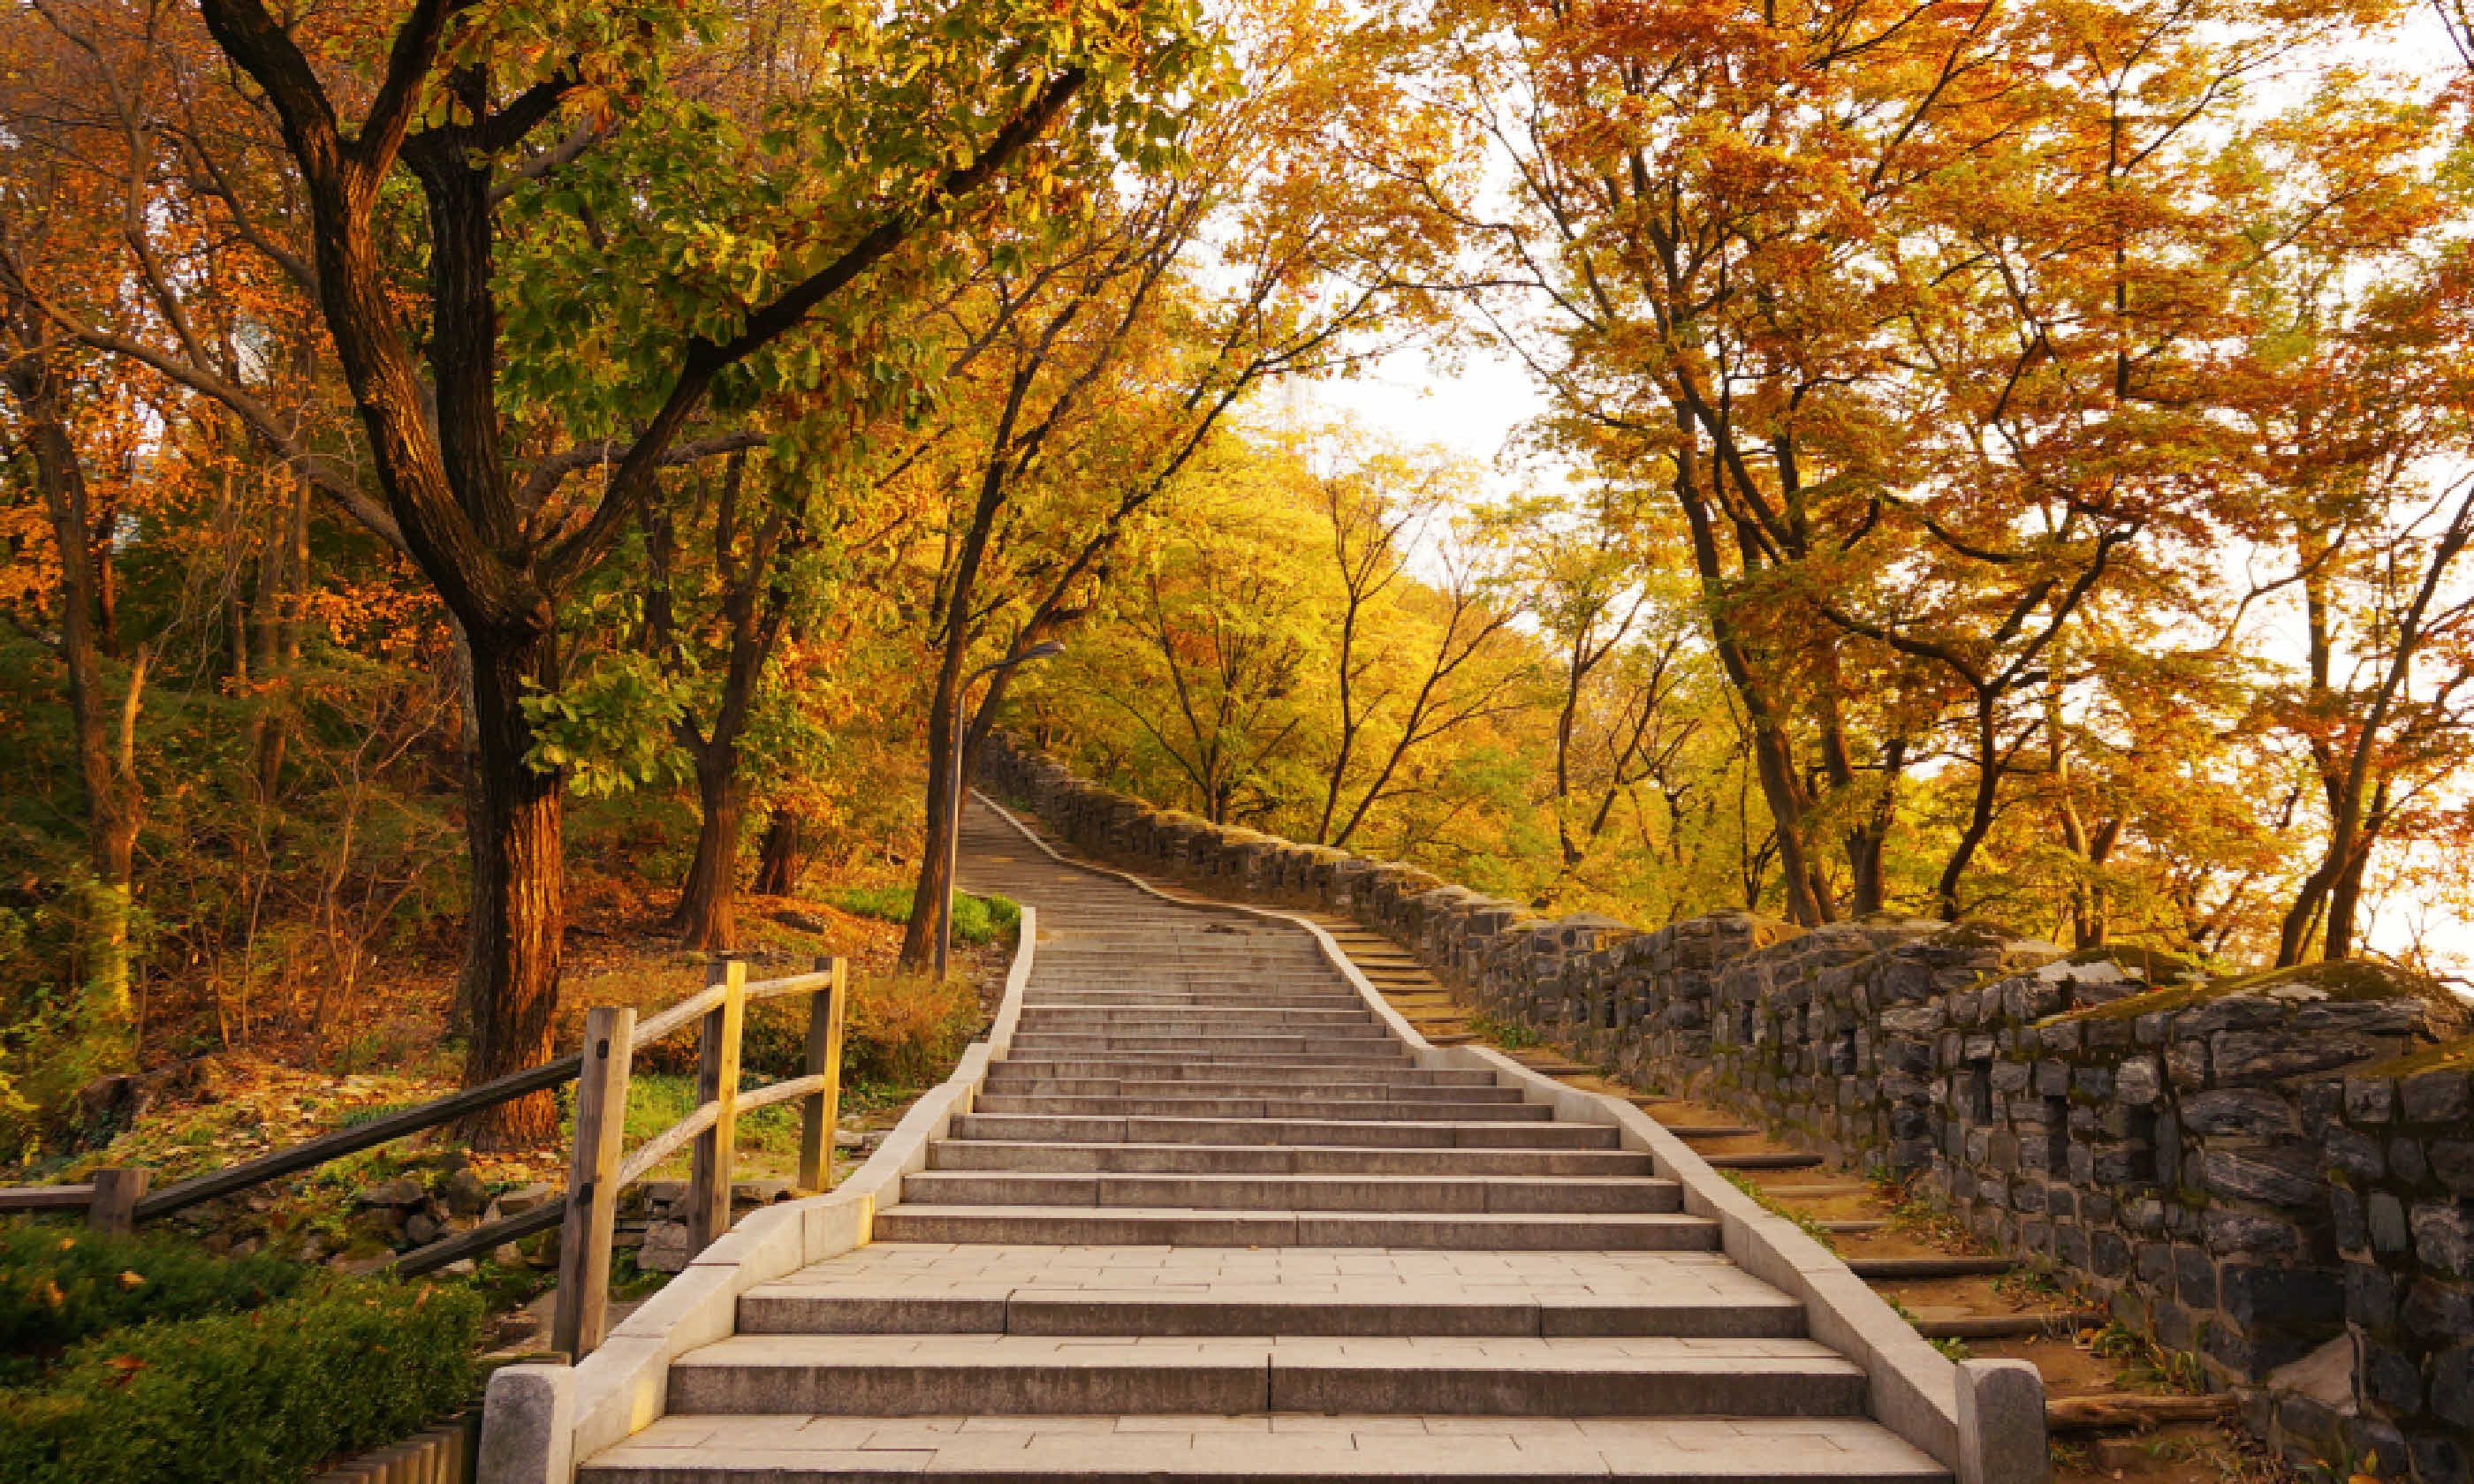 Stairs going uphill during autumn (Shutterstock)